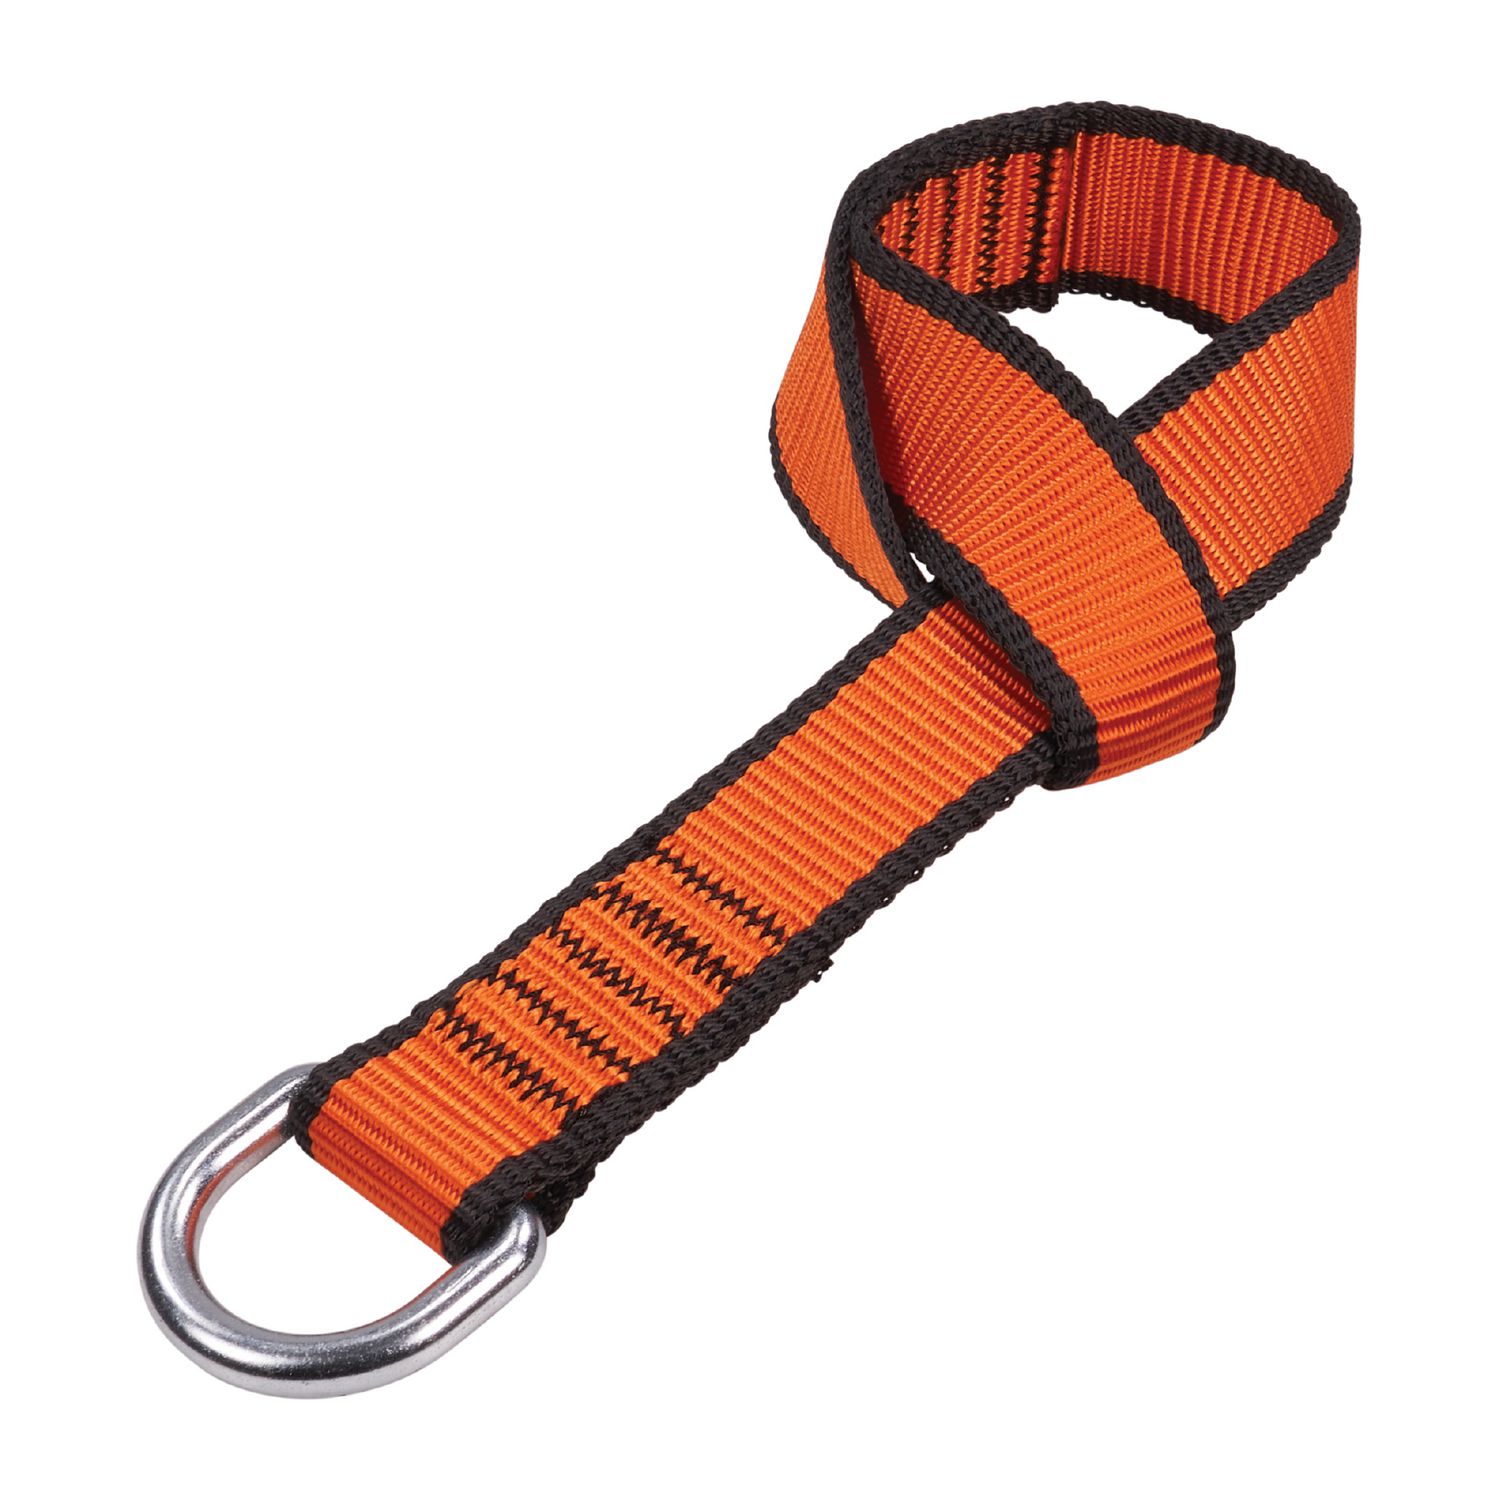 Squids 3174 Anchor Choke Strap for Tool Tethering, 25 lb Max Safe 